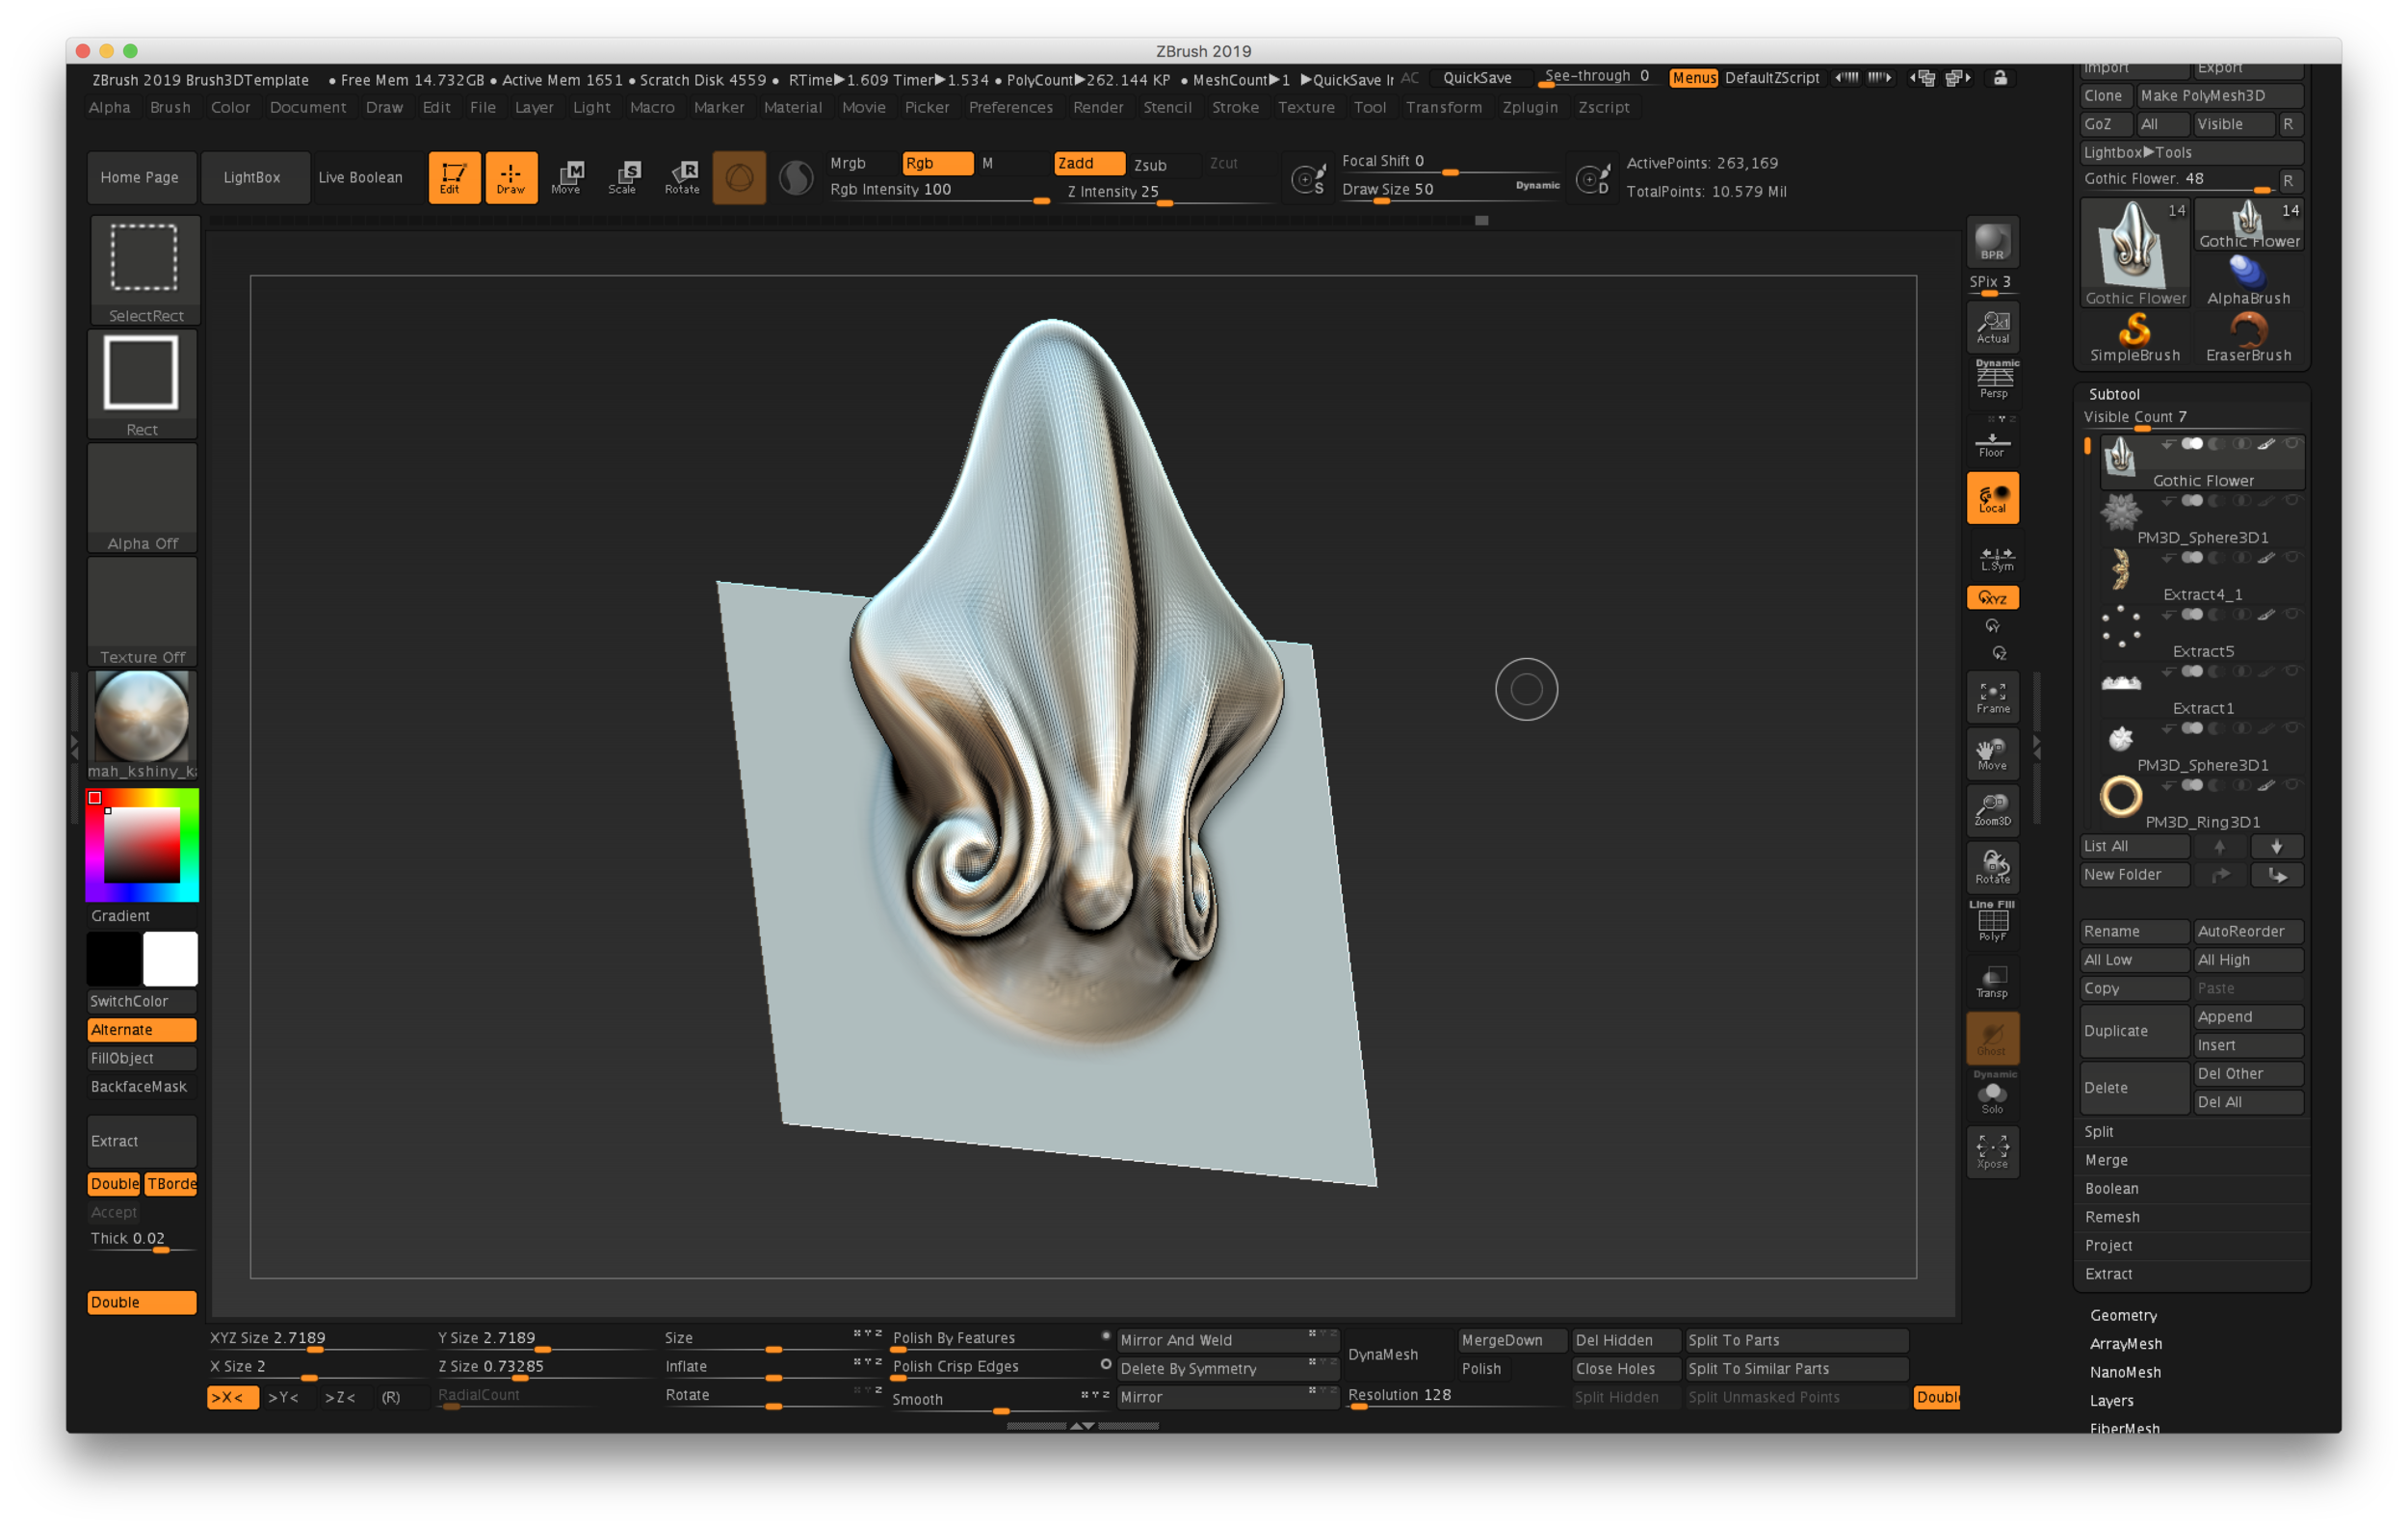 copy zbrush preferences file to new computer